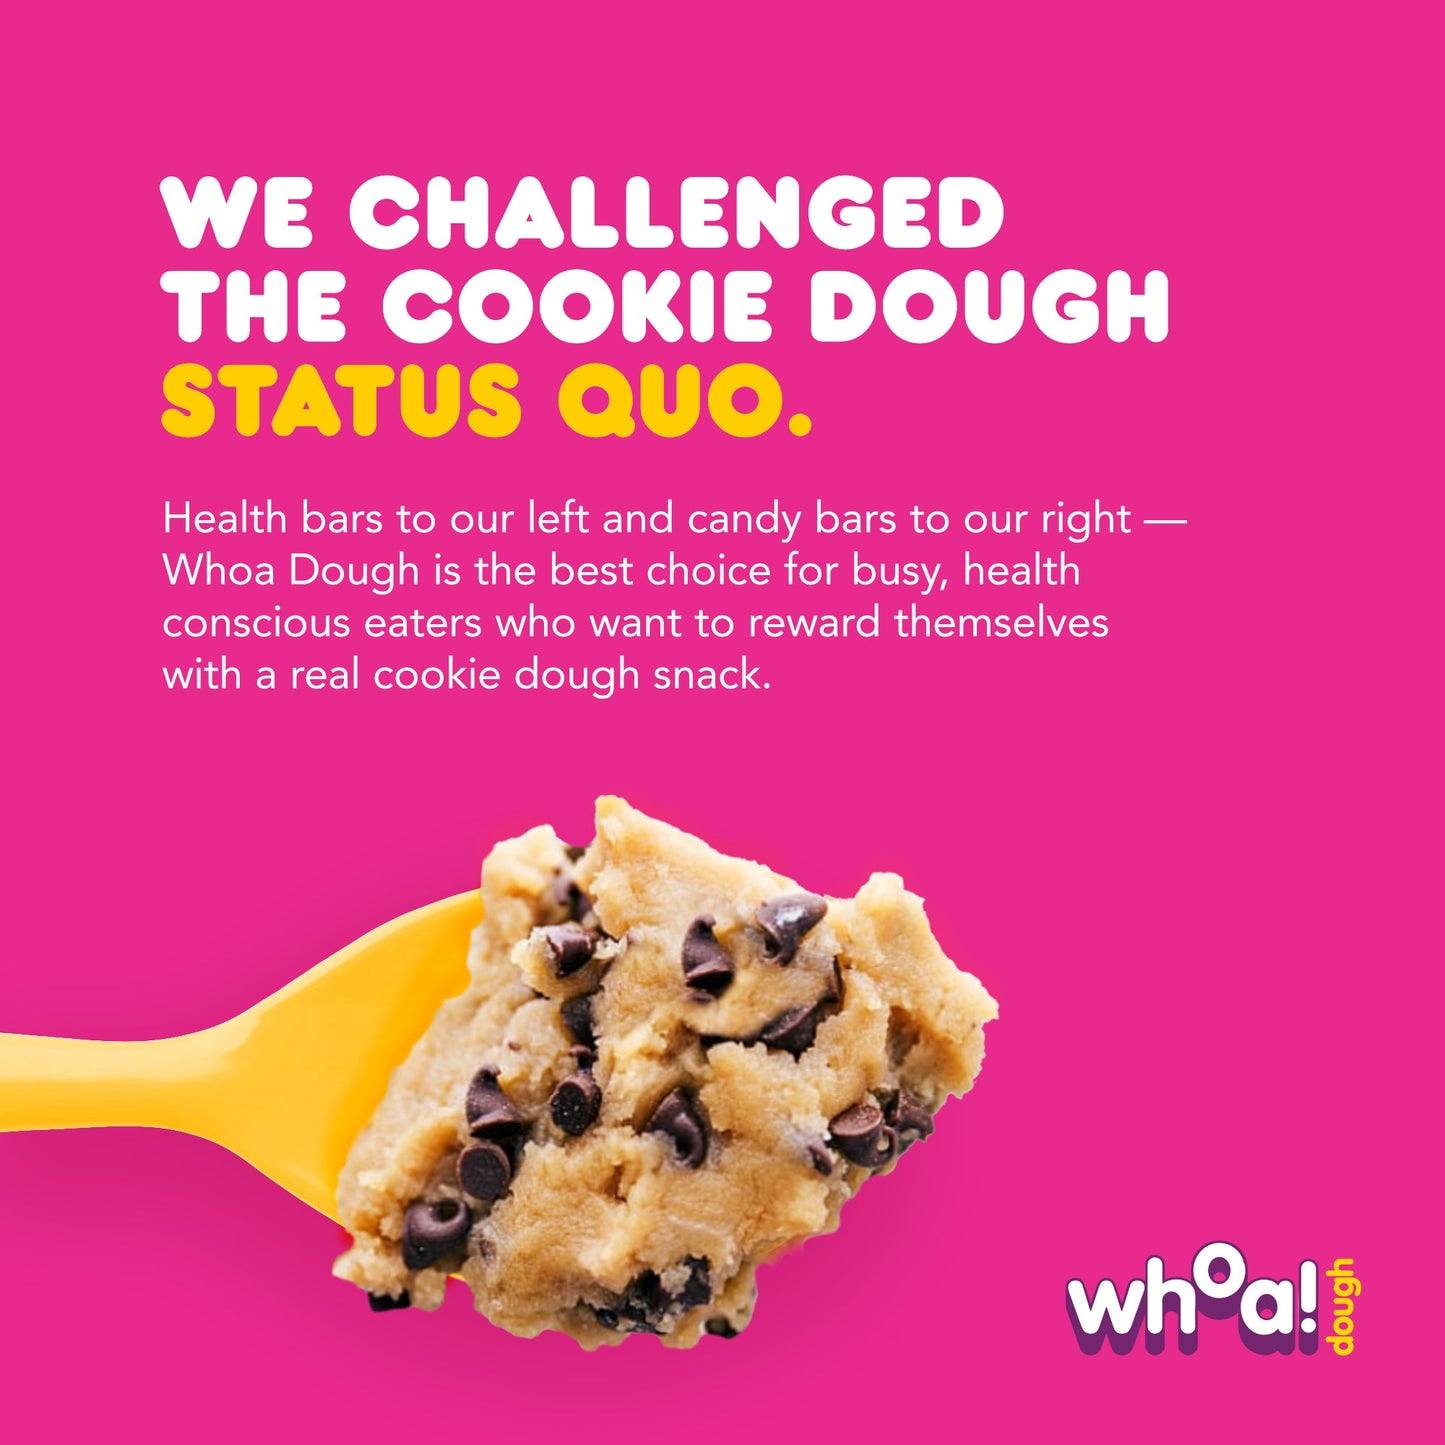 Chocolate Chip Cookie Dough by Whoa Dough